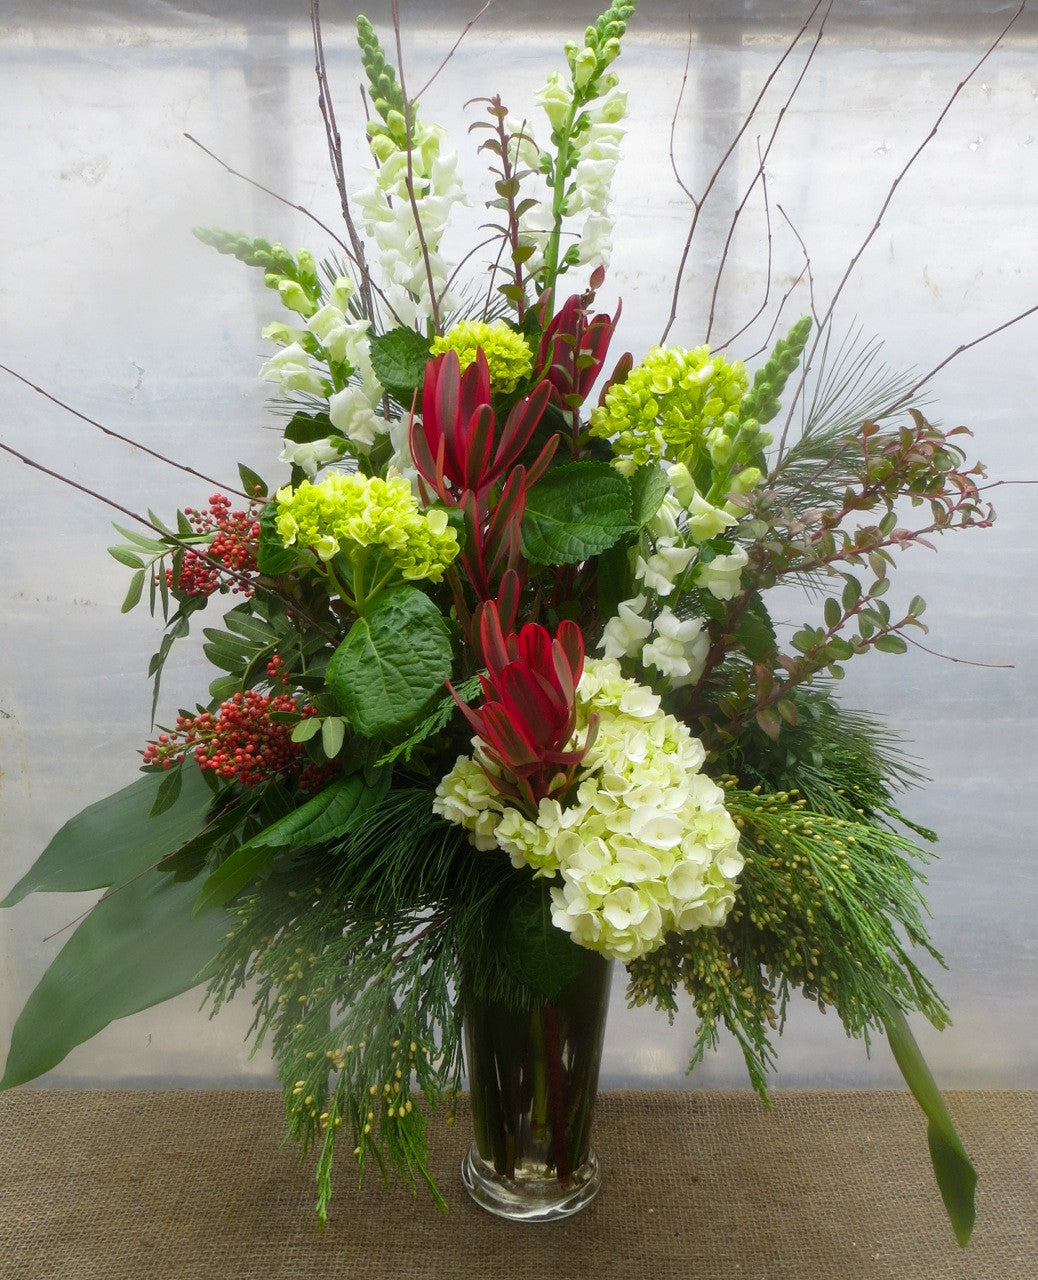 Kingswood: Floral Vase Arrangement with Evergreens, Pepperberries, and Hydrangea. Designed by Michler's Florist in Lexington, Ky